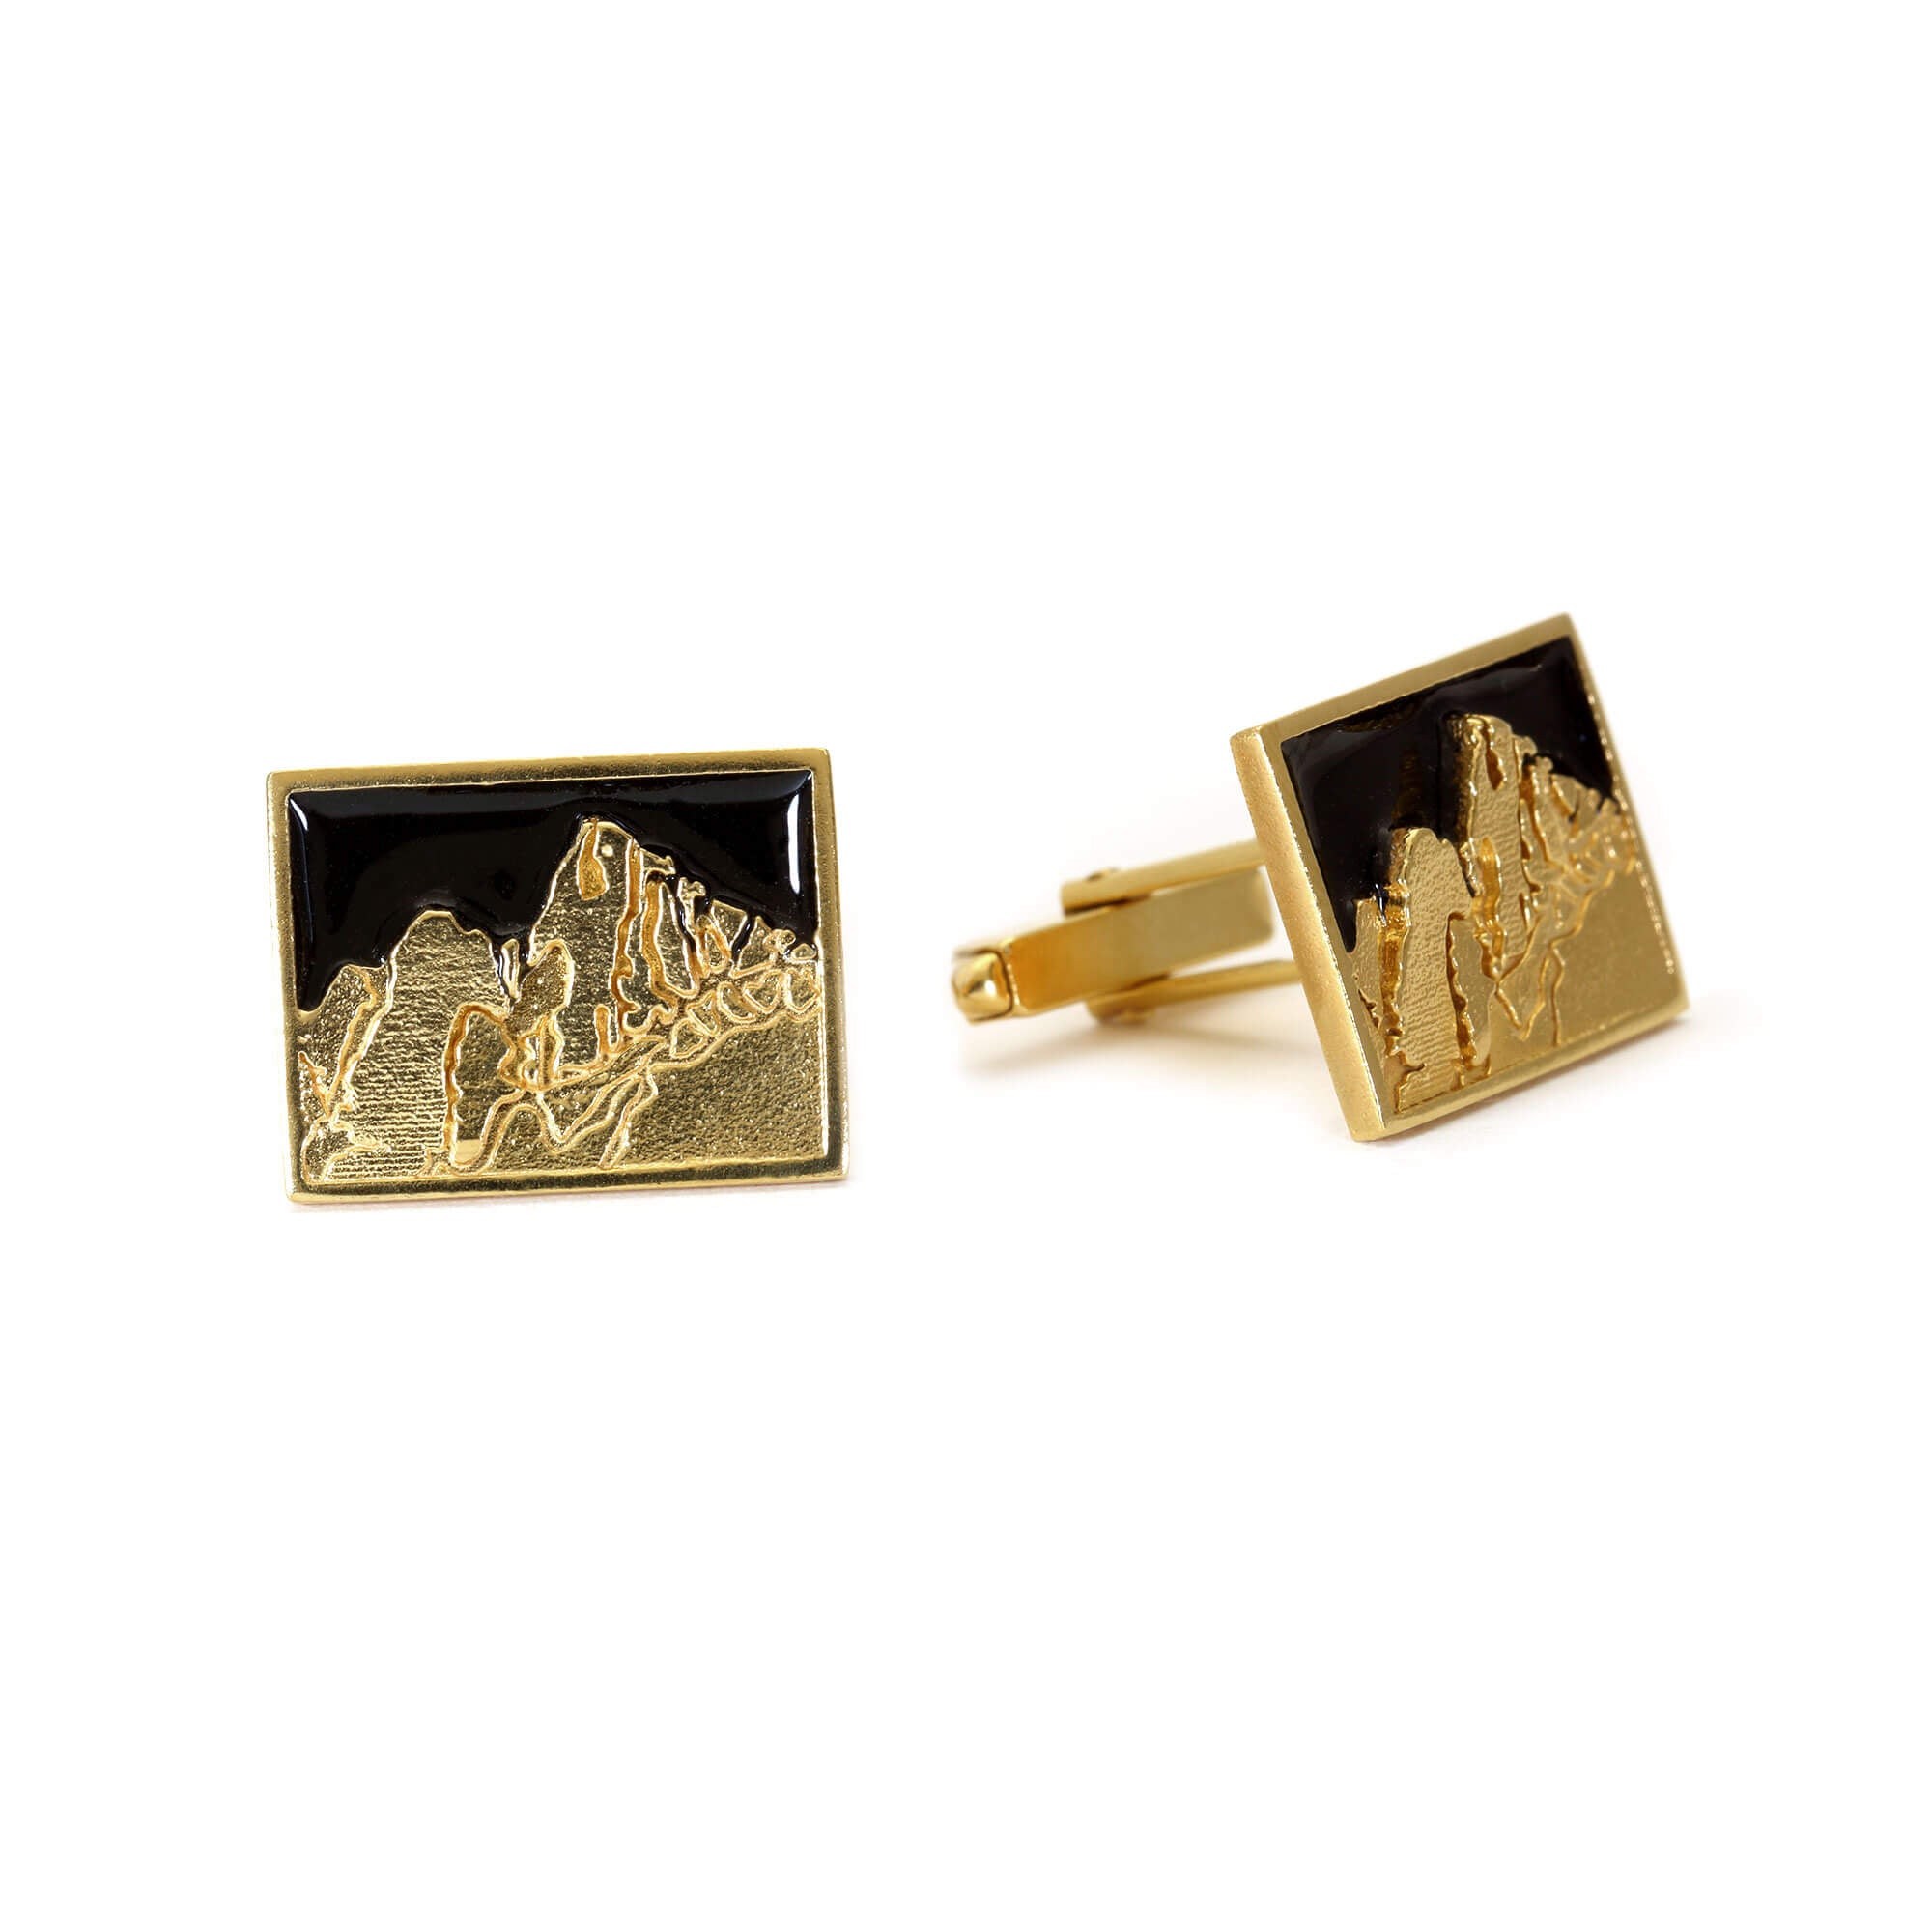 A pair of Cuillin Ridge mountain cufflinks in gold and black enamel